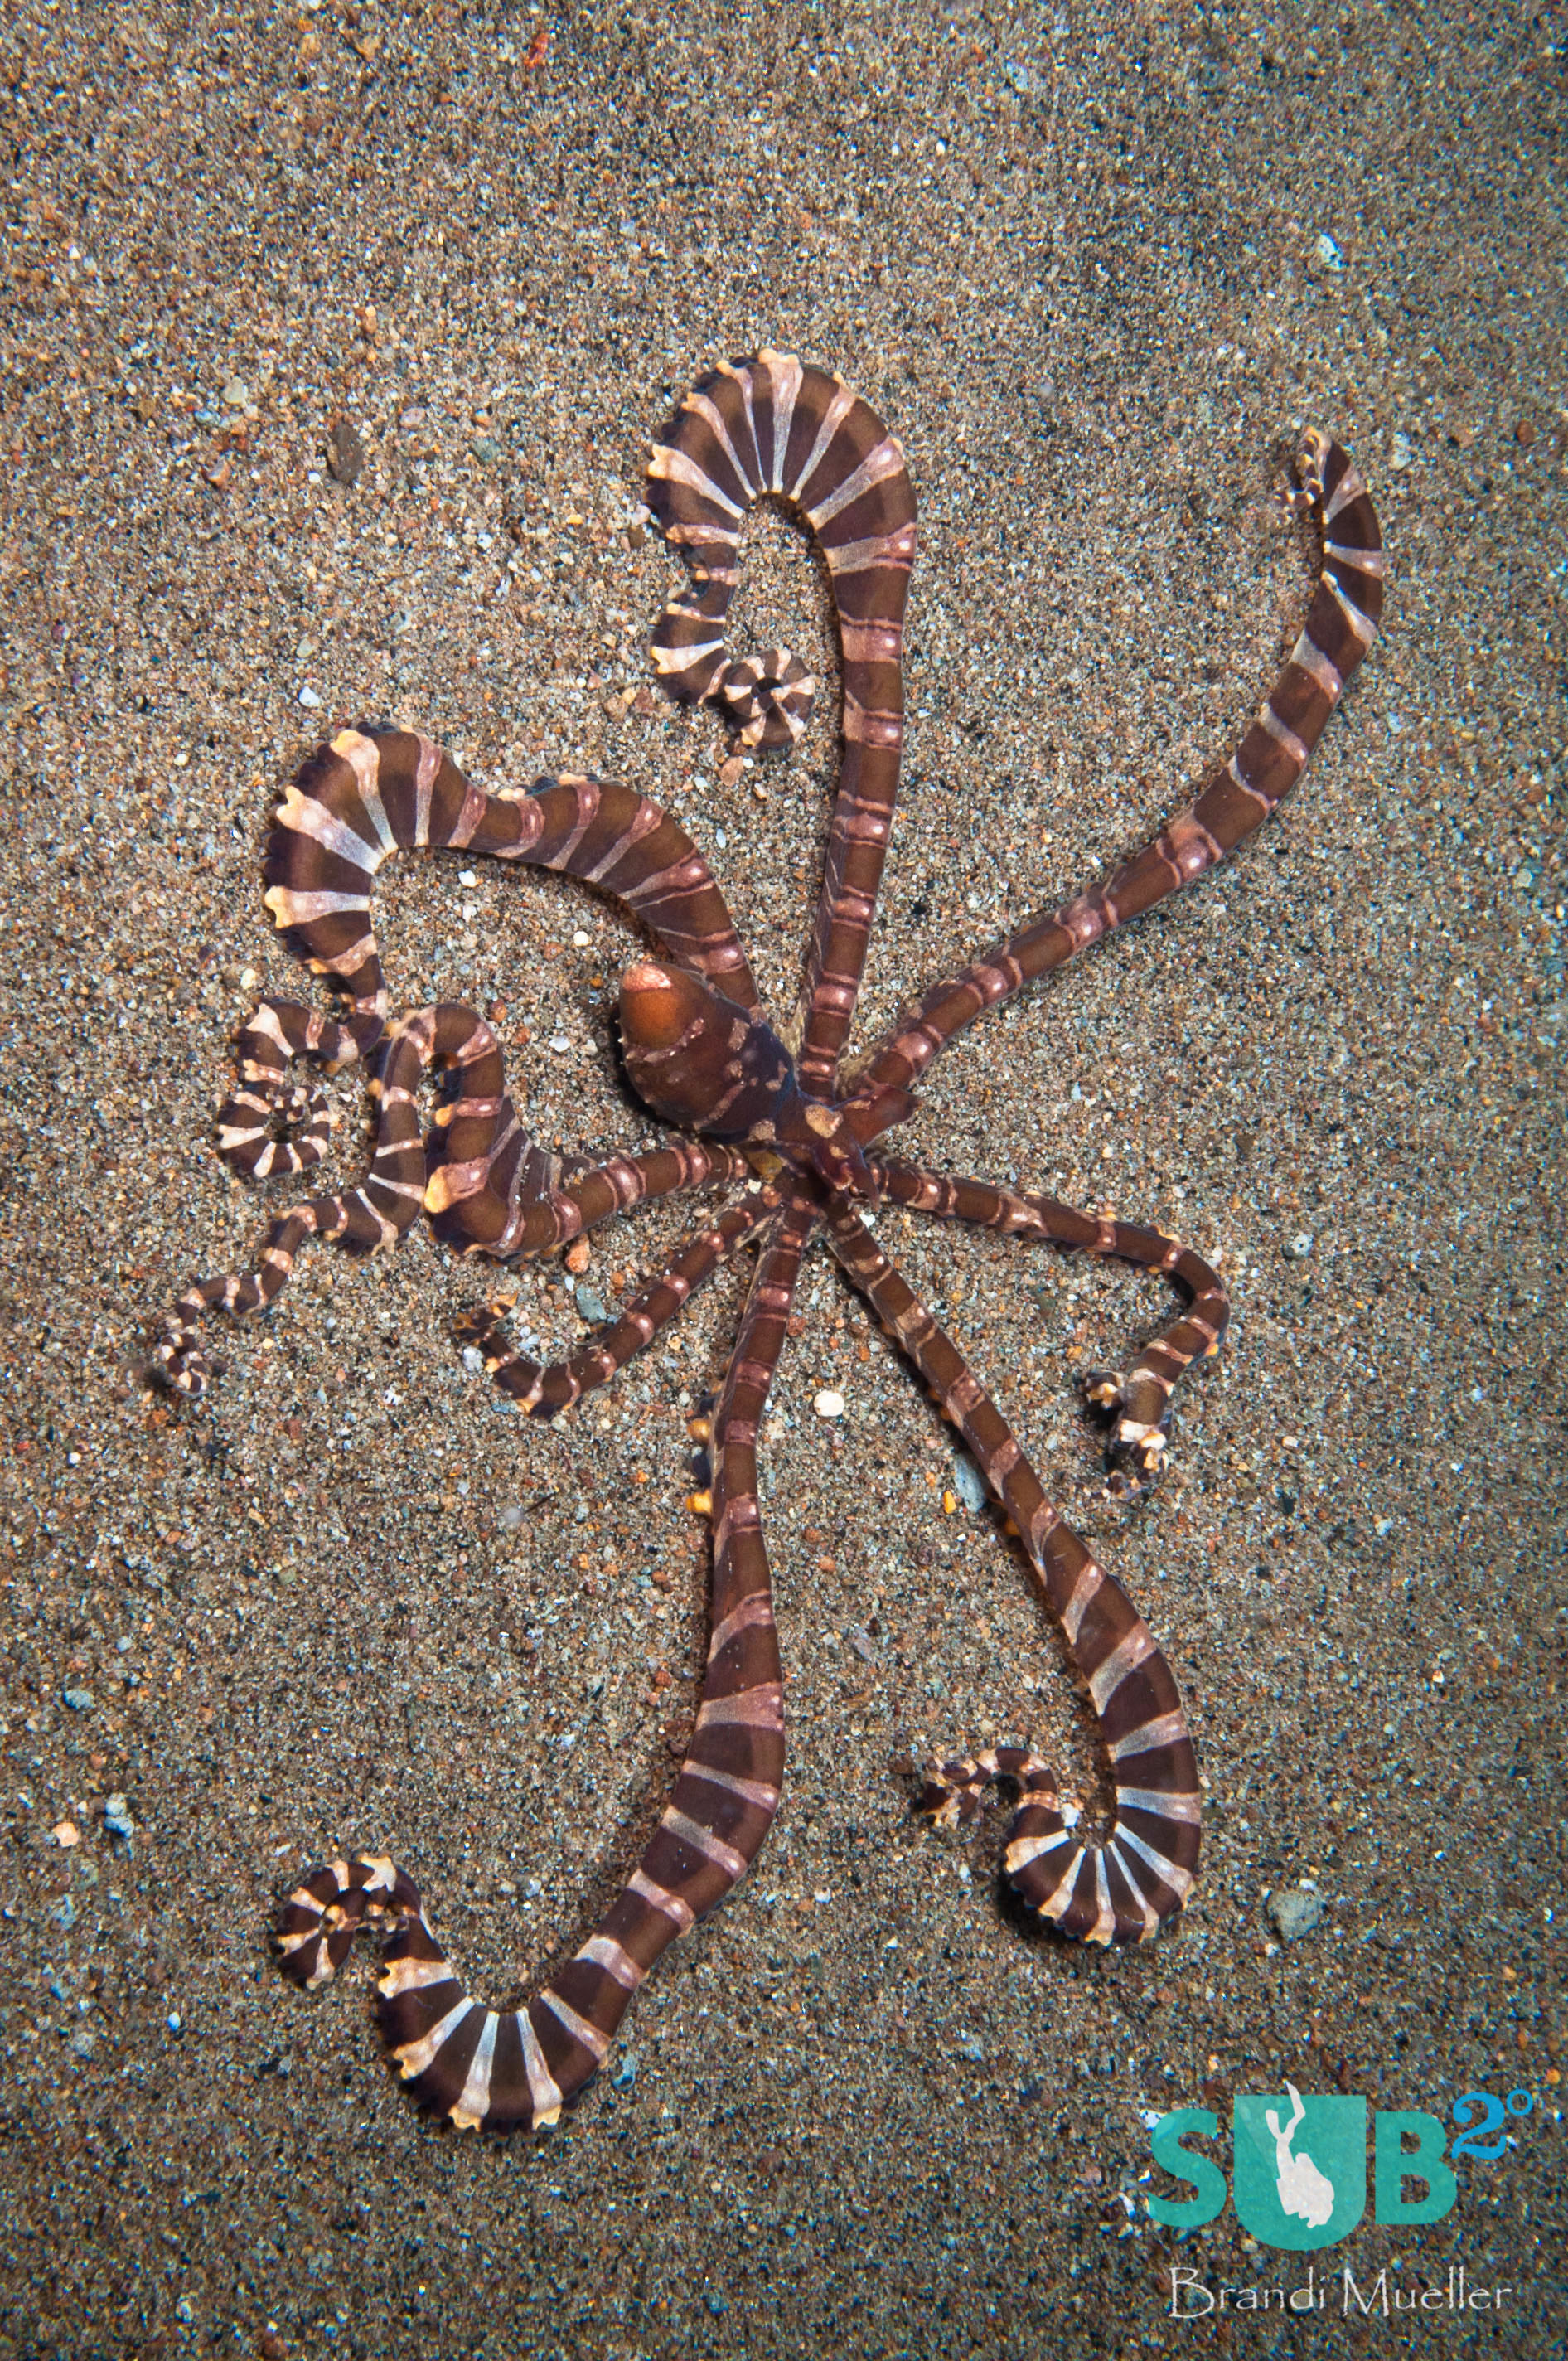 The unique and beautiful wonderpus crawls across the sand flashing colors as it moves.